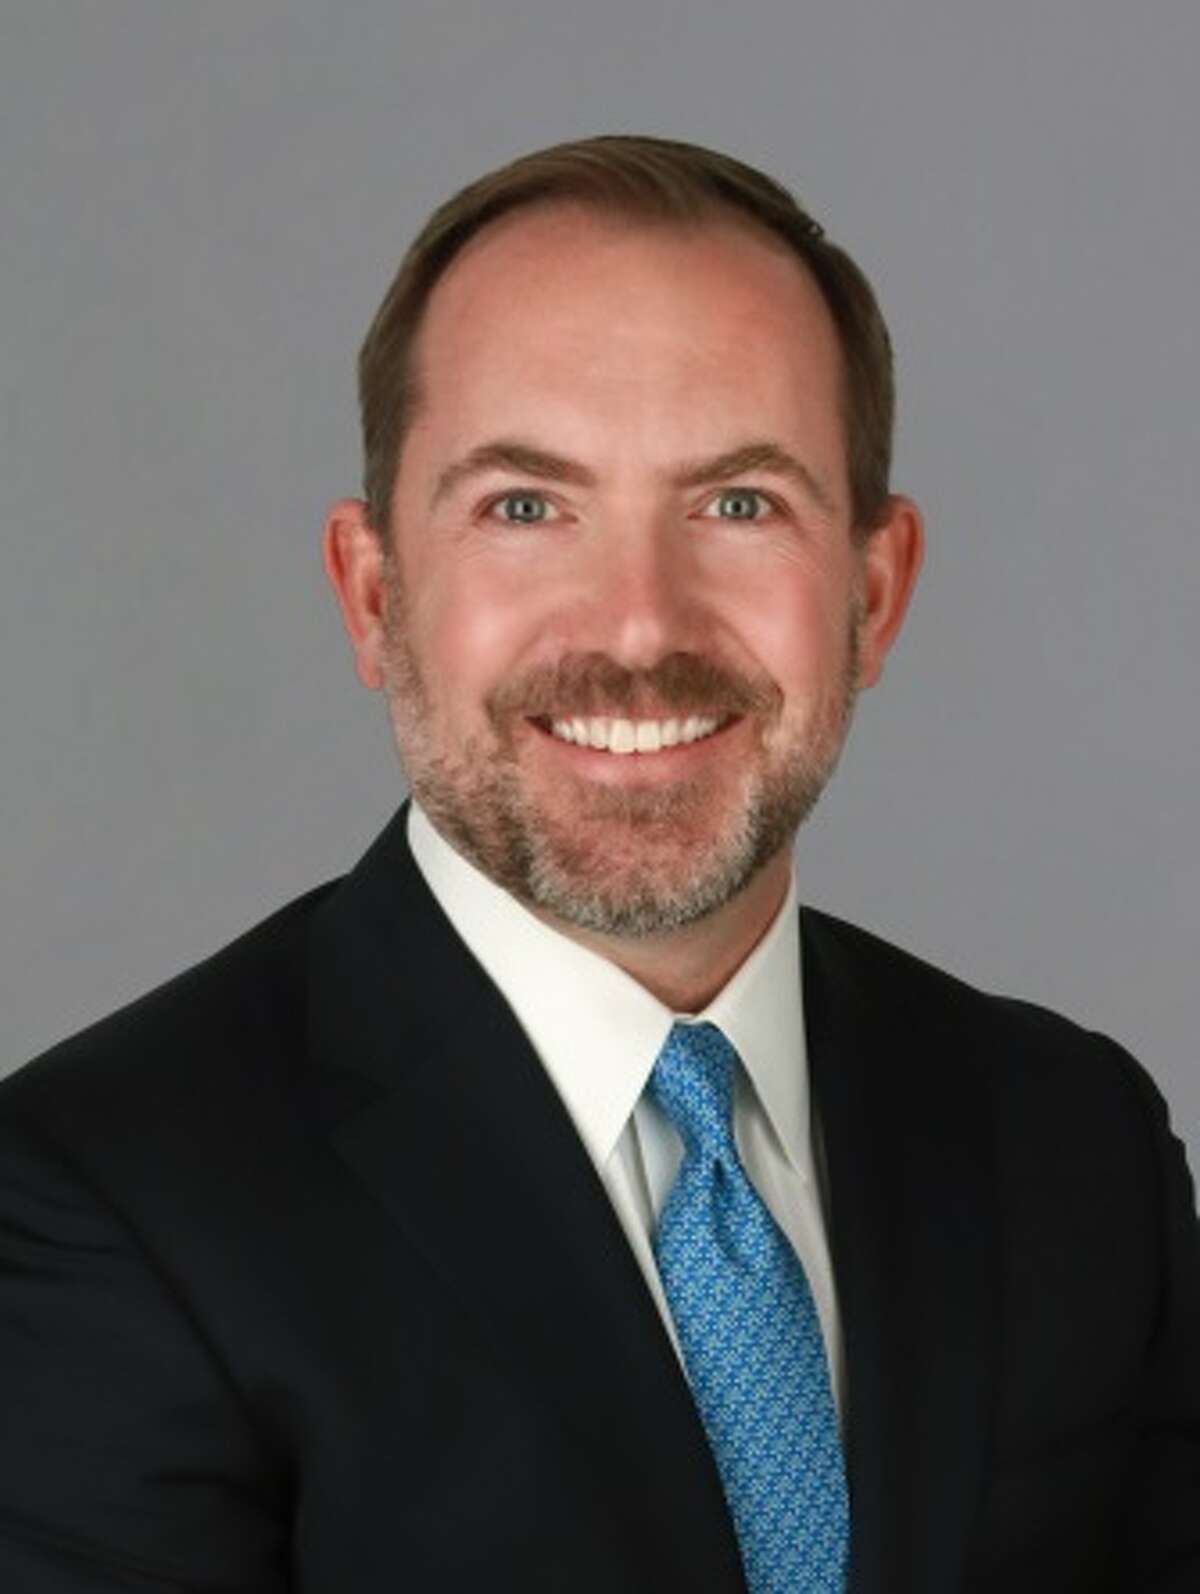 Justin Robinson, executive managing director and partner of Stream Realty Partners' Houston office, has been named as a key leader of the national real estate firm's Industrial Development Services division.